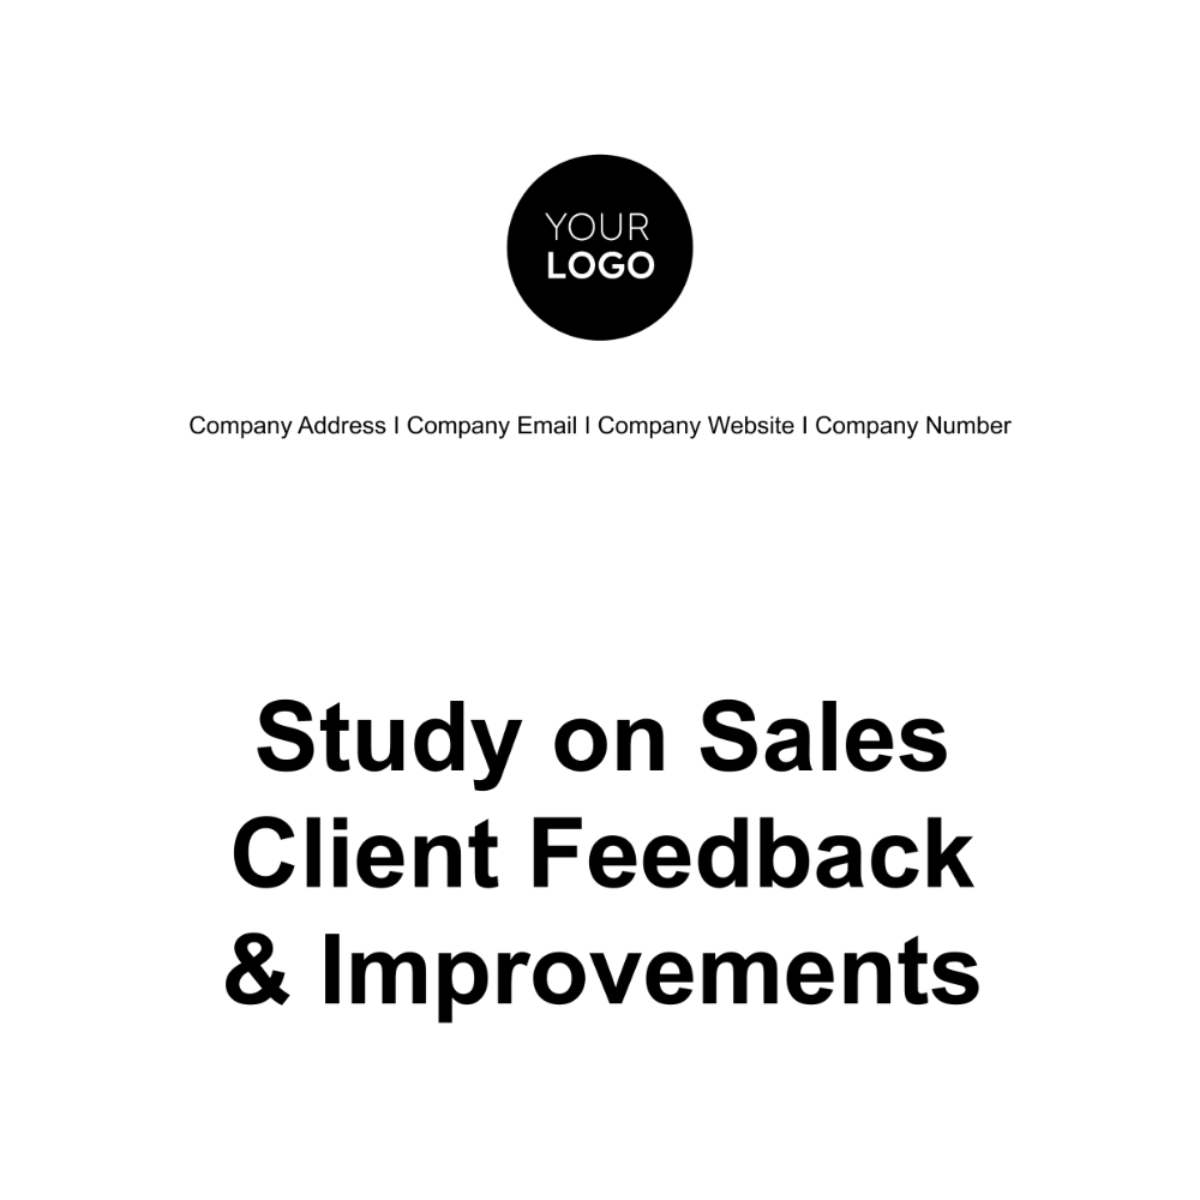 Study on Sales Client Feedback and Improvements Template